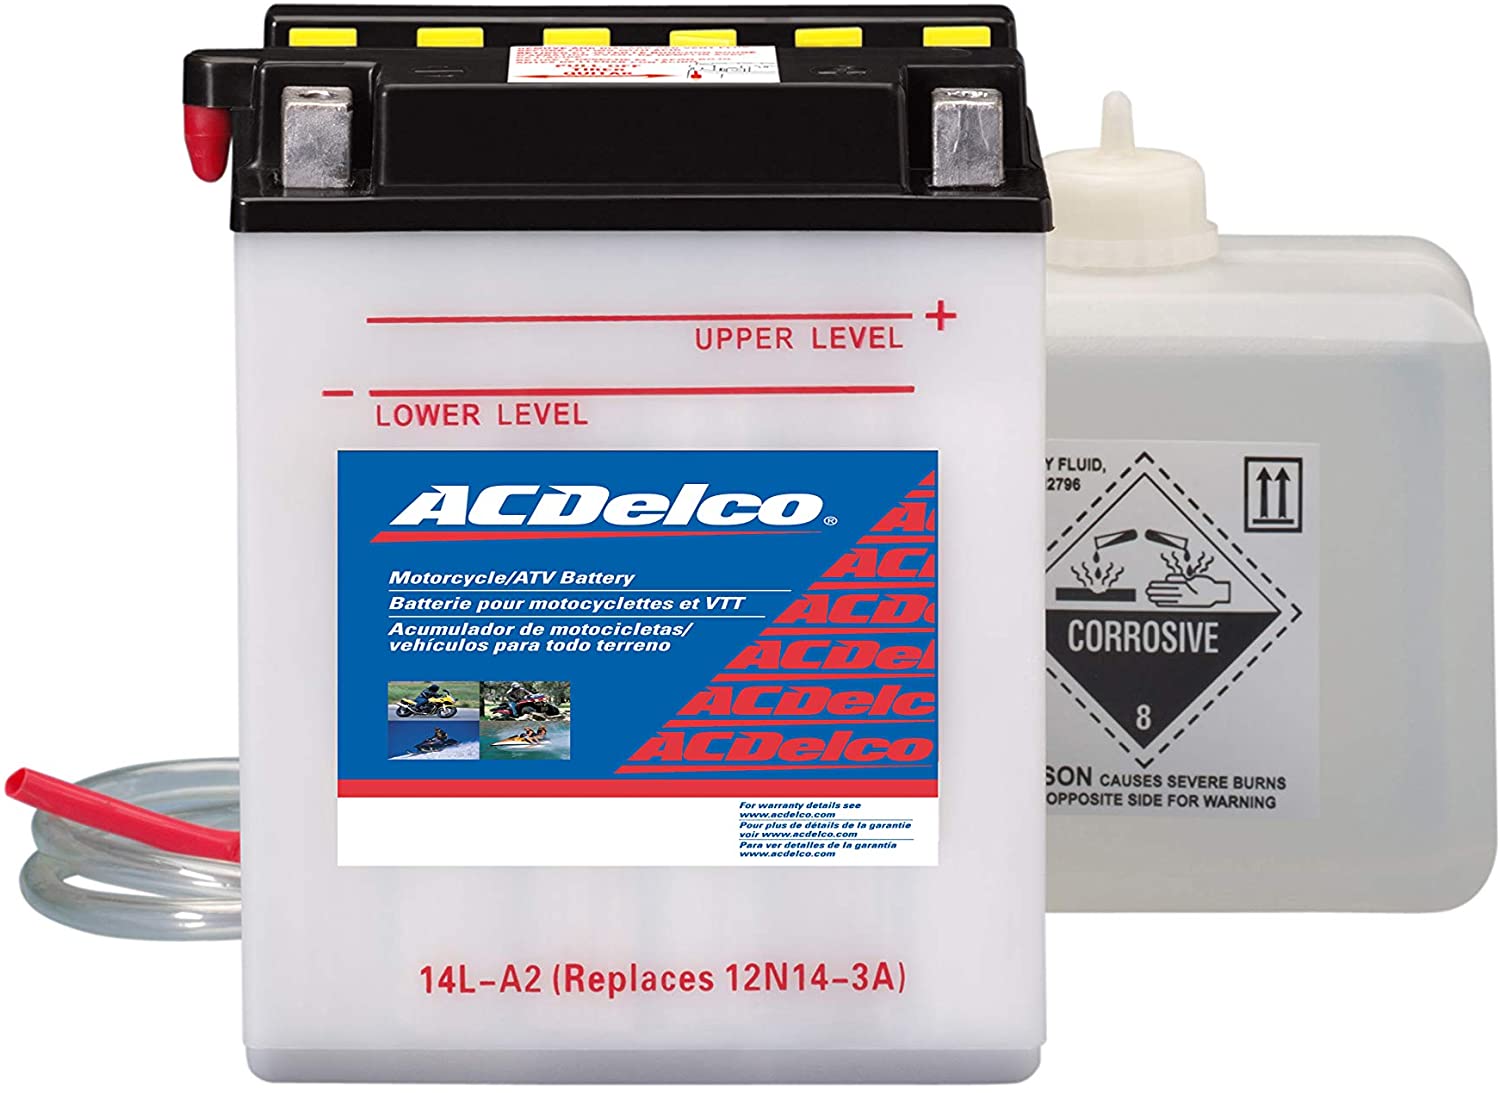 ACDelco AB14LA2 Specialty Conventional Powersports JIS 14L-A2 Battery